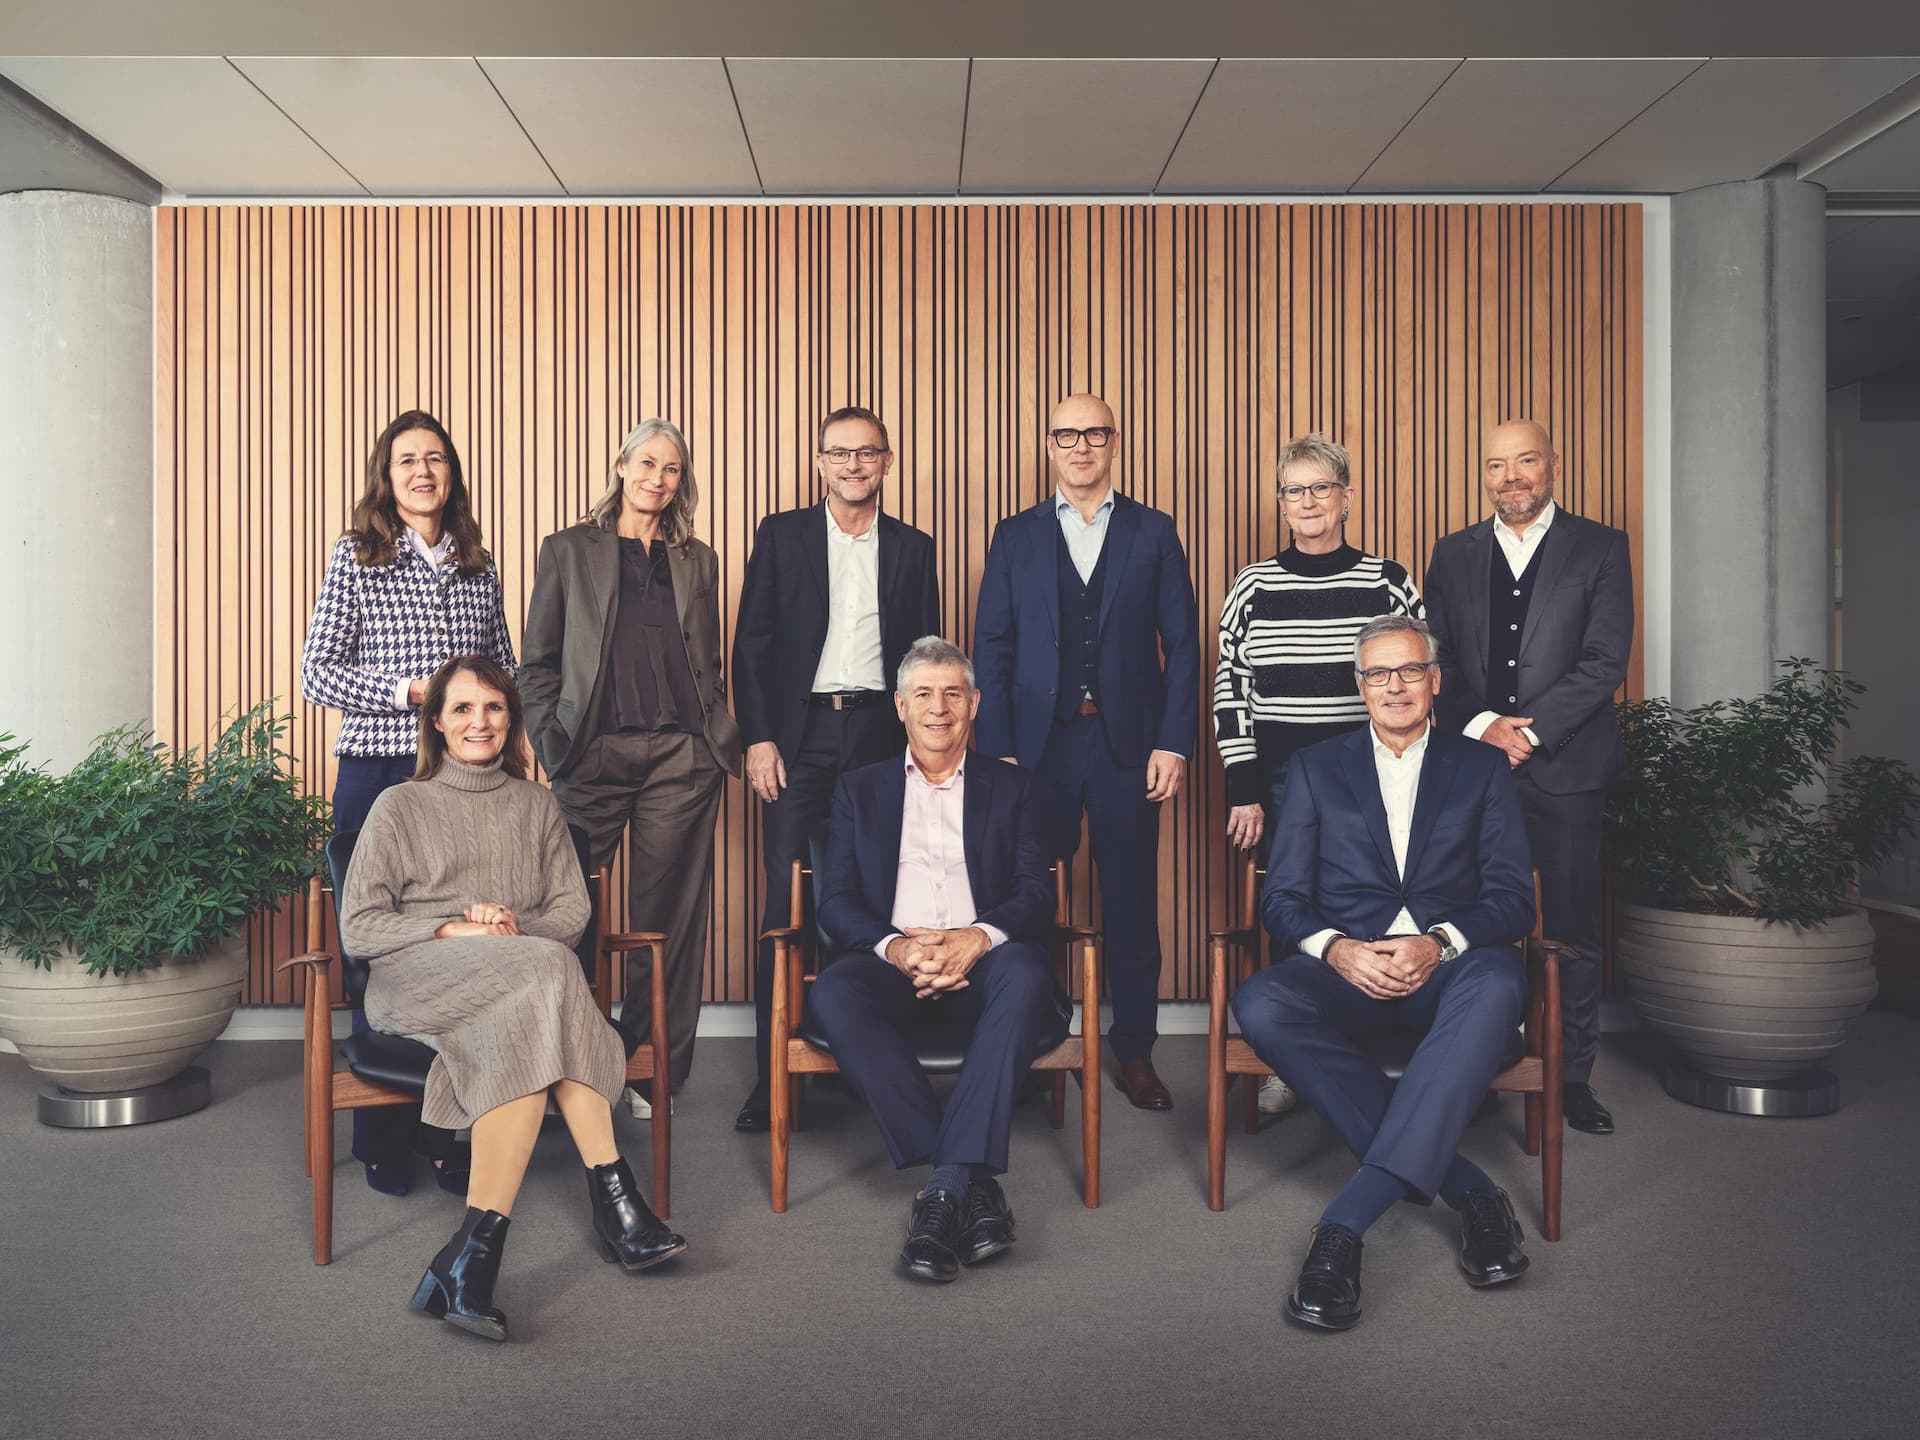 The Ramboll Group Board of Directors
Back from left:
Lieve Declercq, Helene Bekker,
Steen Nørbæk Madsen, Thomas 
Gregers Honoré, Mette Thiel, and
Jeff Gravenhorst
Front from left:
Anne Broeng, Alun Griffiths, and
Claus Hemmingsen